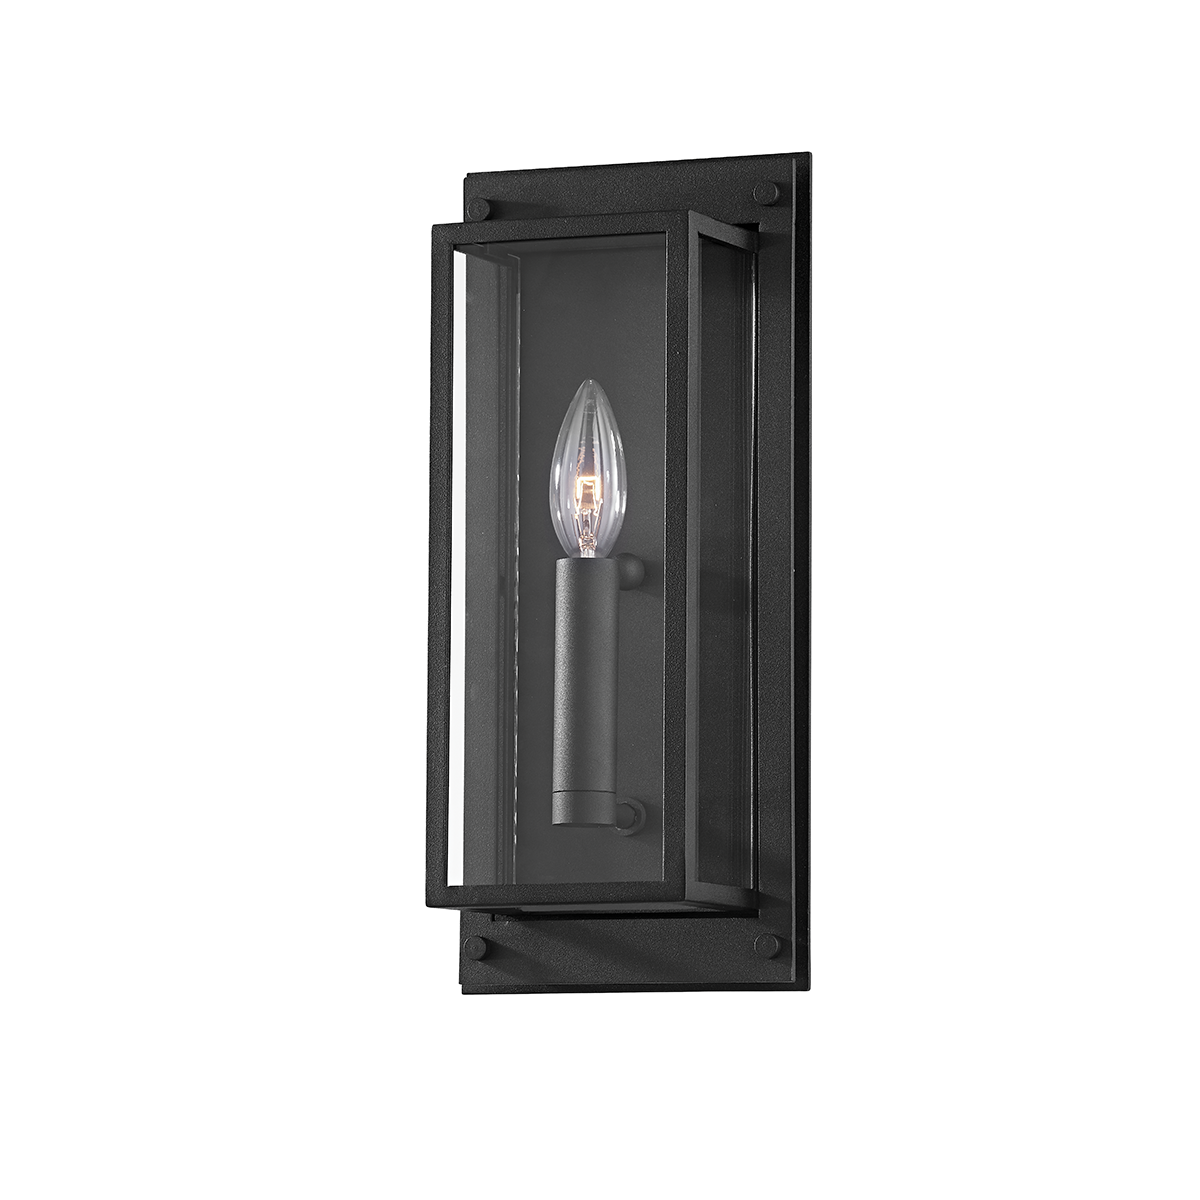 Troy WINSLOW 1 LIGHT SMALL EXTERIOR WALL SCONCE B9101 Outdoor l Wall Troy Lighting   